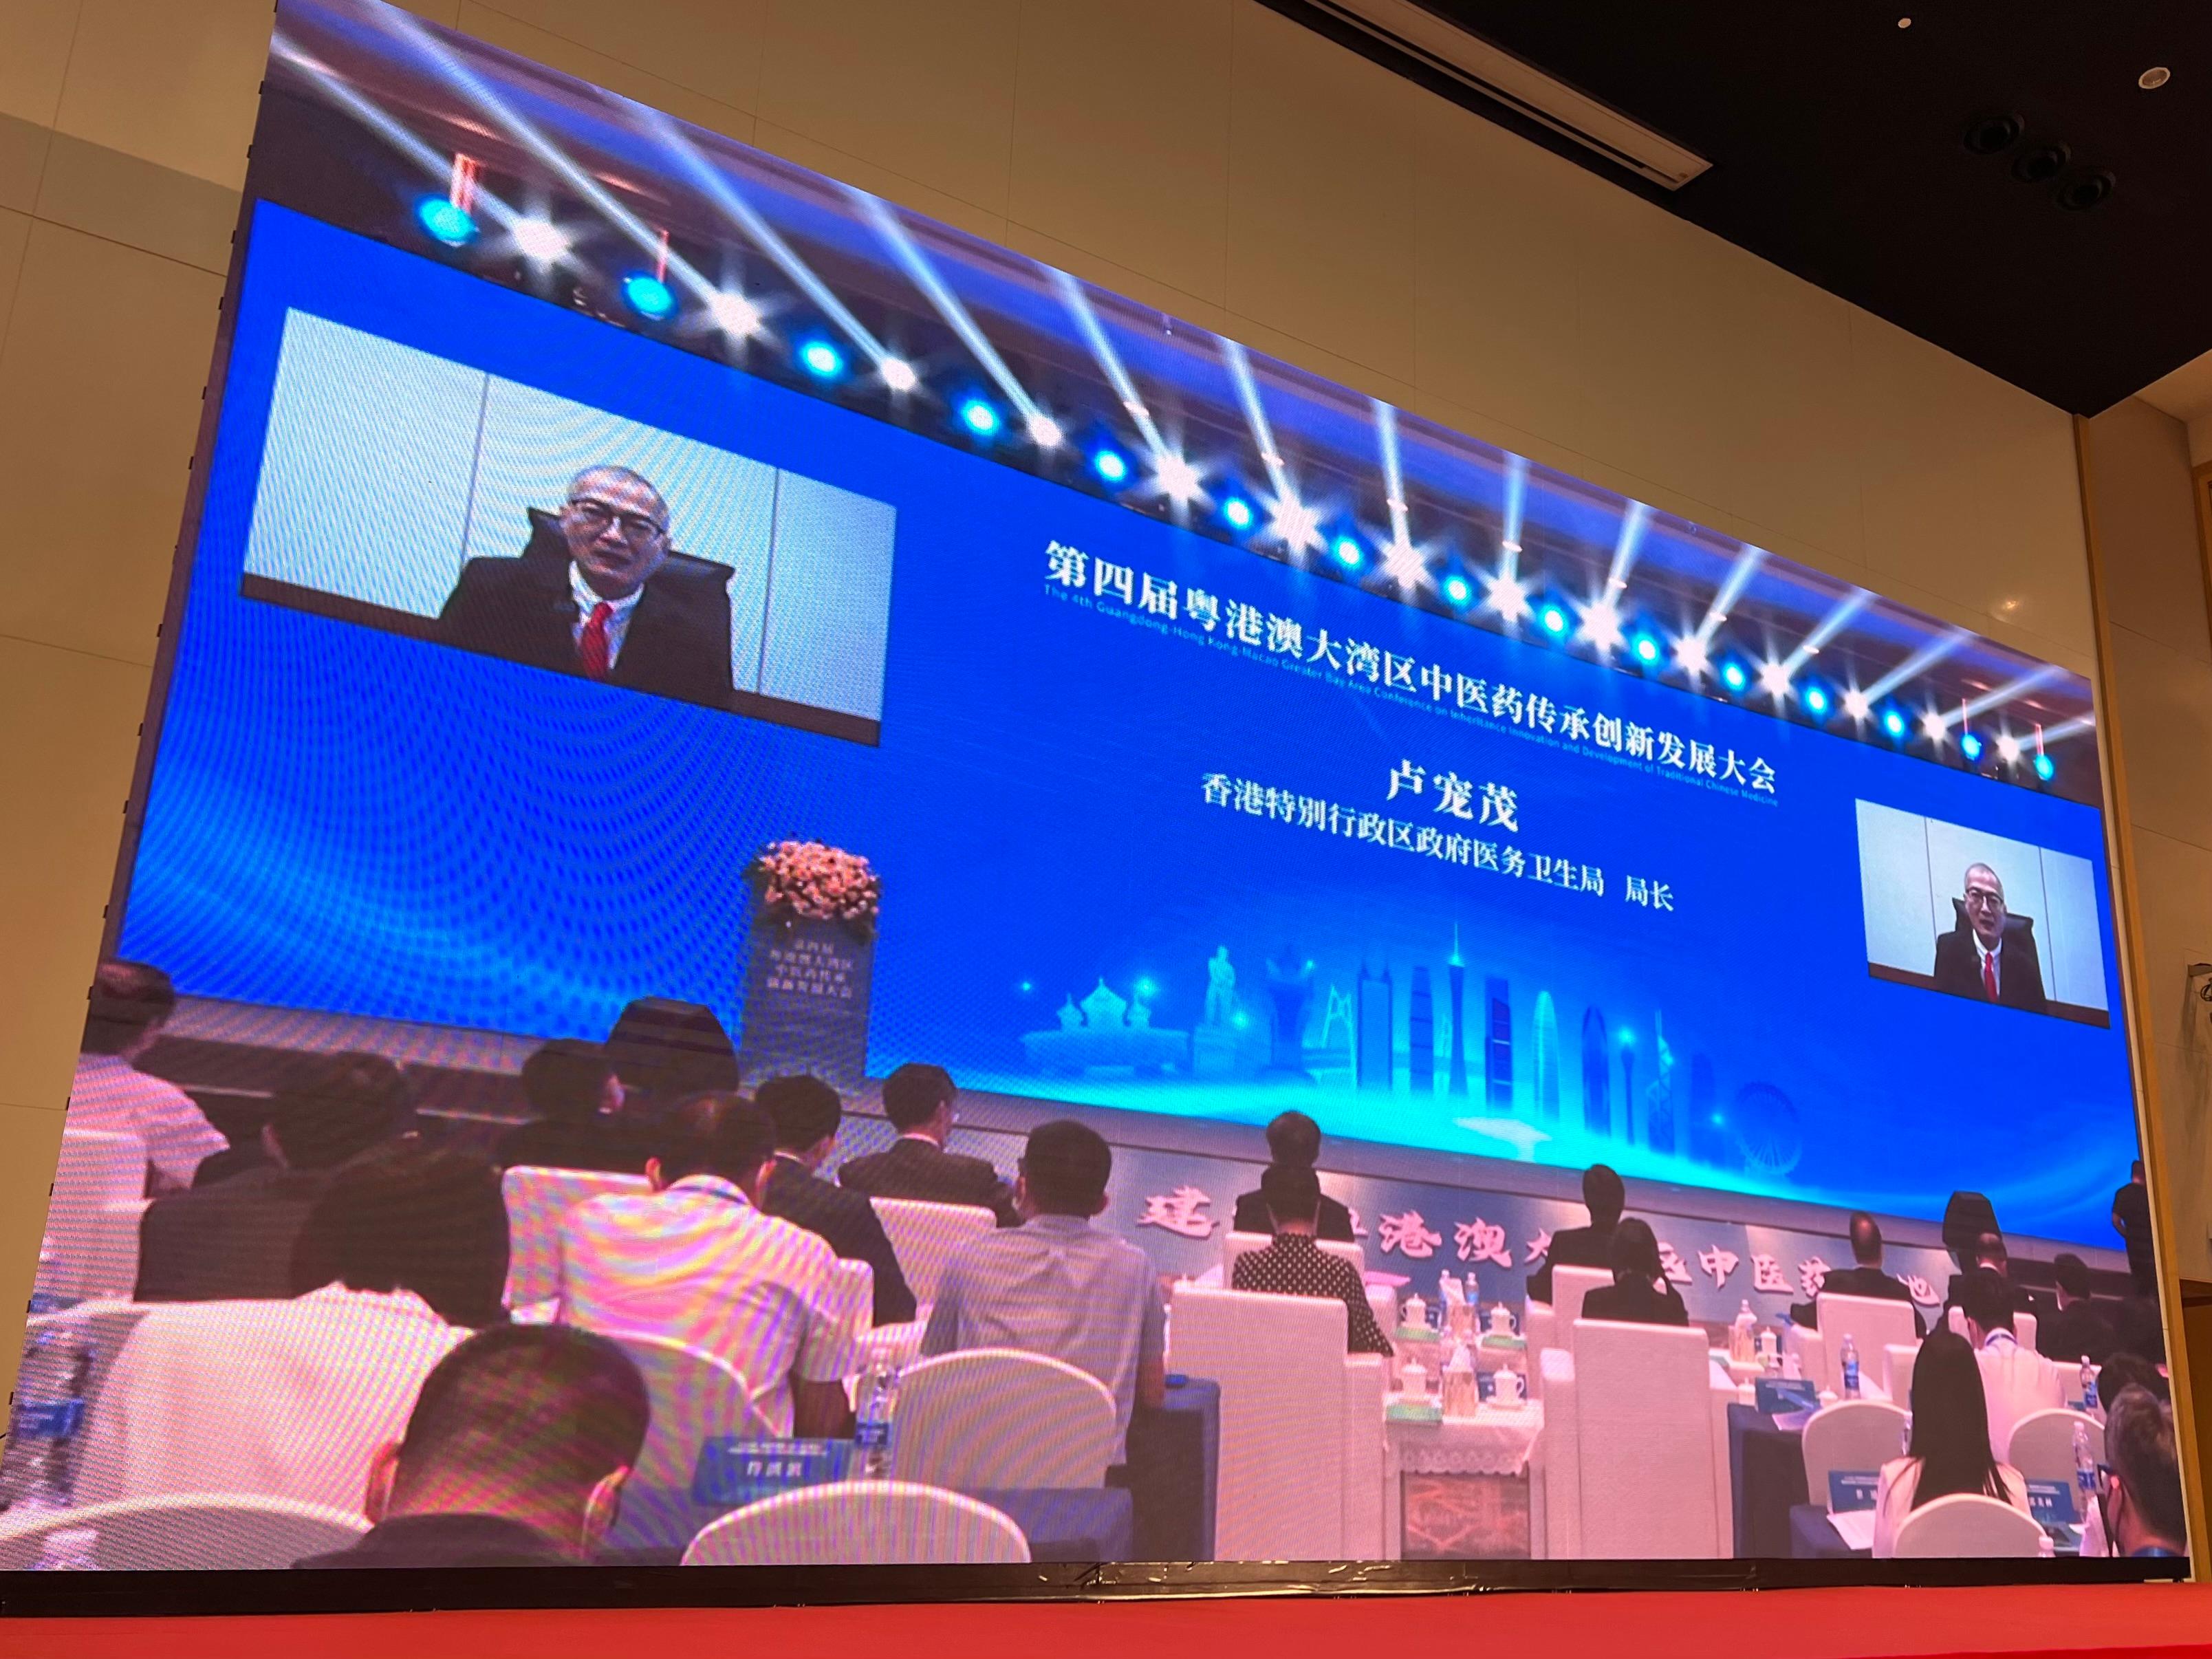 The Secretary for Health, Professor Lo Chung-mau, attended the 4th Guangdong-Hong Kong-Macao Greater Bay Area Conference on Inheritance, Innovation and Development of Traditional Chinese Medicine, and delivered a speech at the opening ceremony via video conferencing today (August 25).